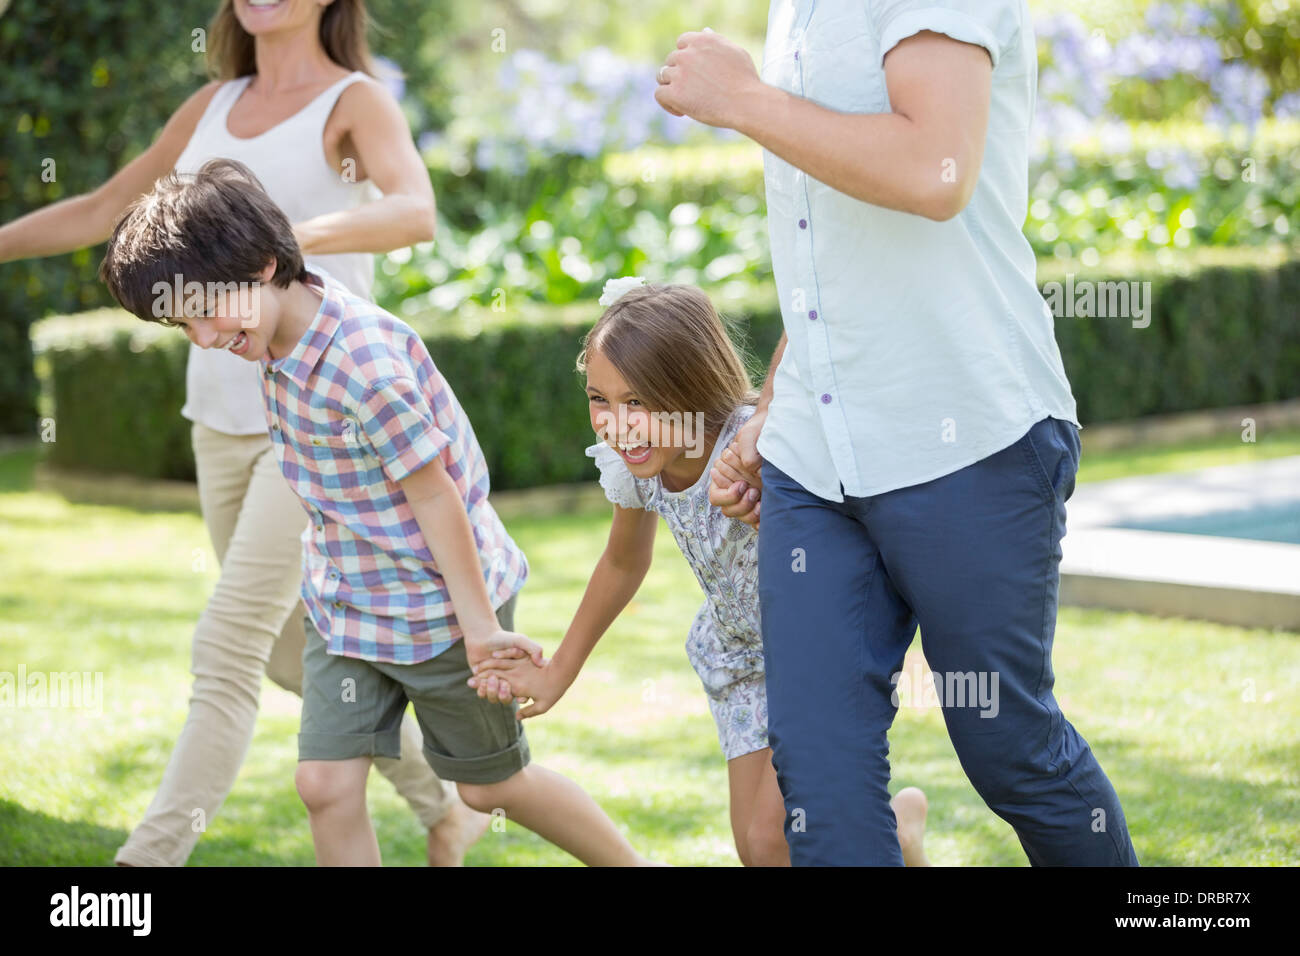 Family holding hands and running in backyard Stock Photo